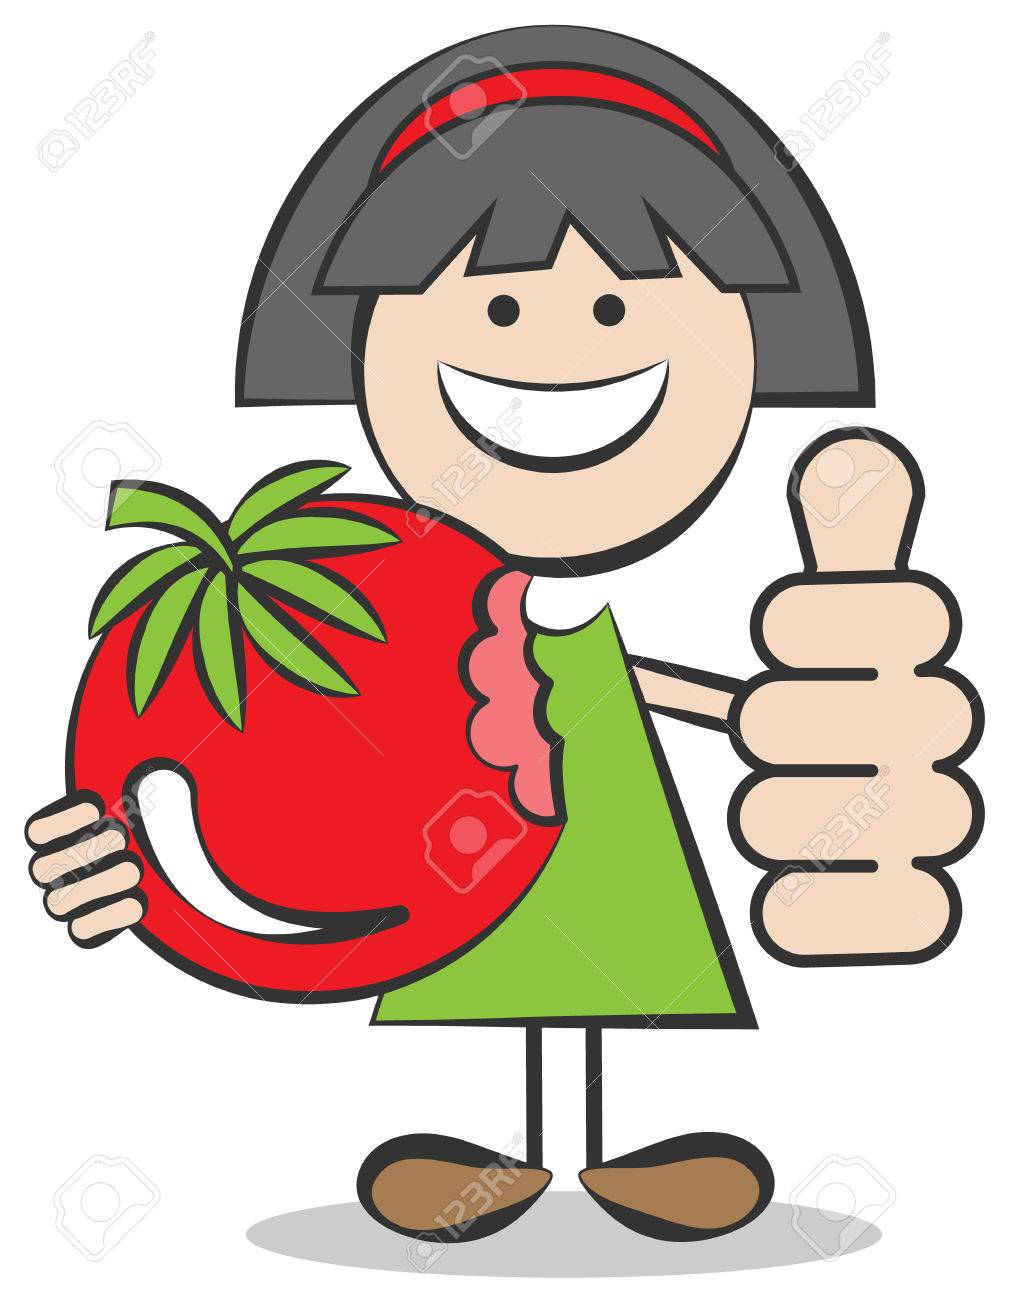 39809786-child-with-a-tomato-vector-illustration